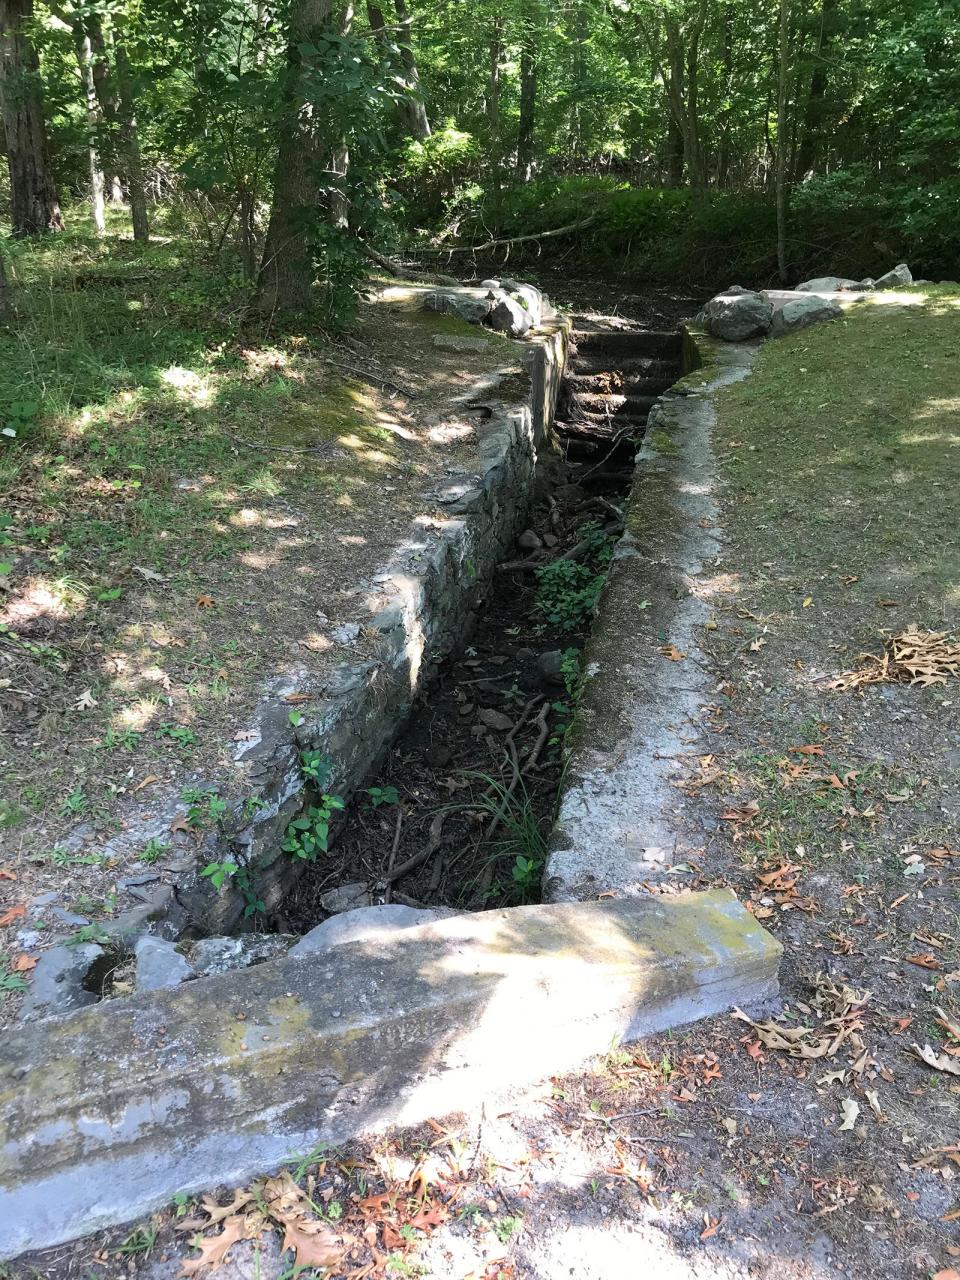 Stone-lined channels built by the Works Progress Administration funnel runoff from the hillside to Mount Hope Bay.